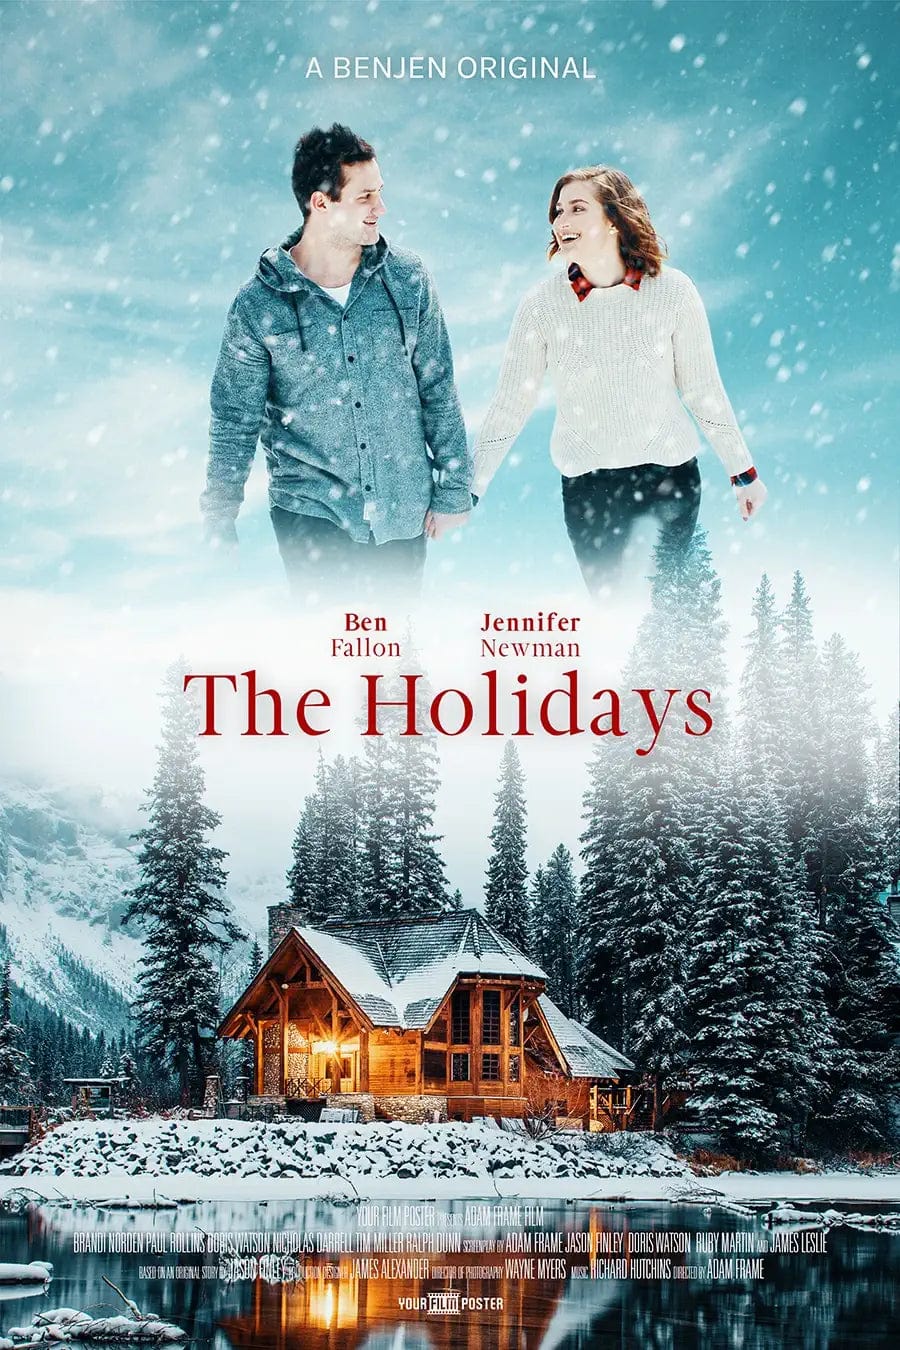 Personalizable film poster showing a cosy warm lake house in the snow, and a couple walking whilst looking at each other smiling